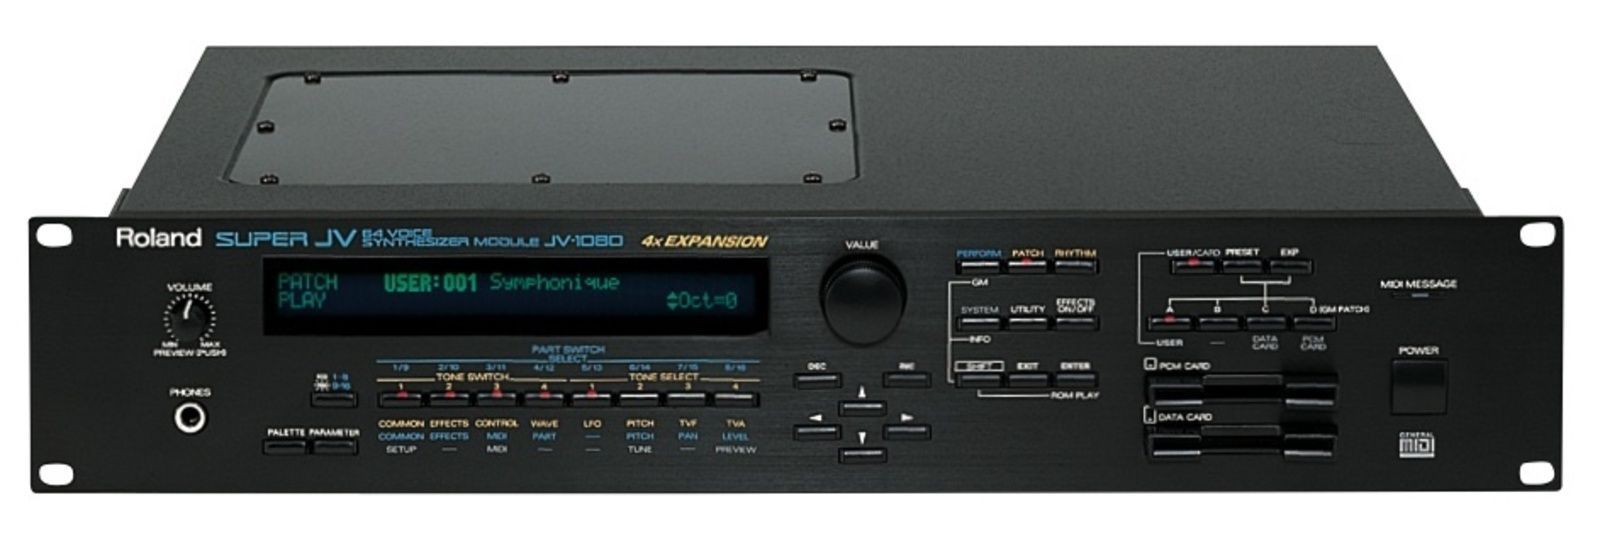 Roland Jv 1080 Users Manual